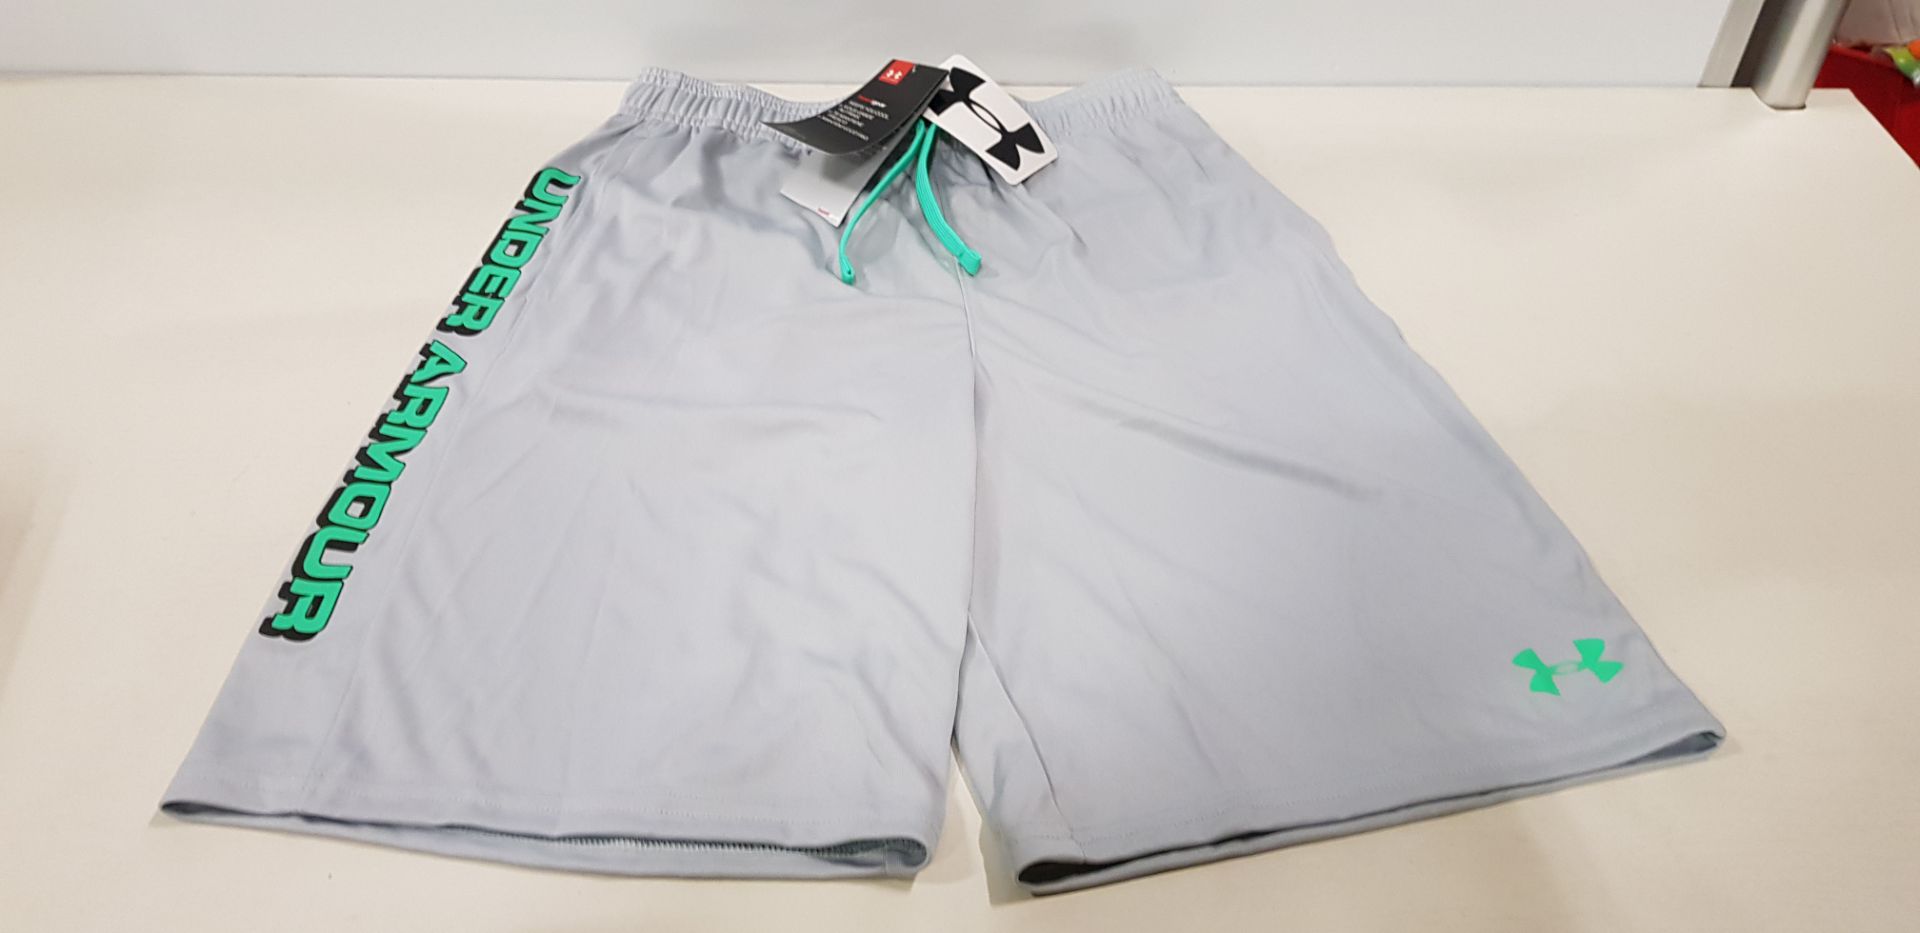 20 X BRAND NEW UNDER ARMOUR GREY SHORTS SIZE YOUTH LARGE